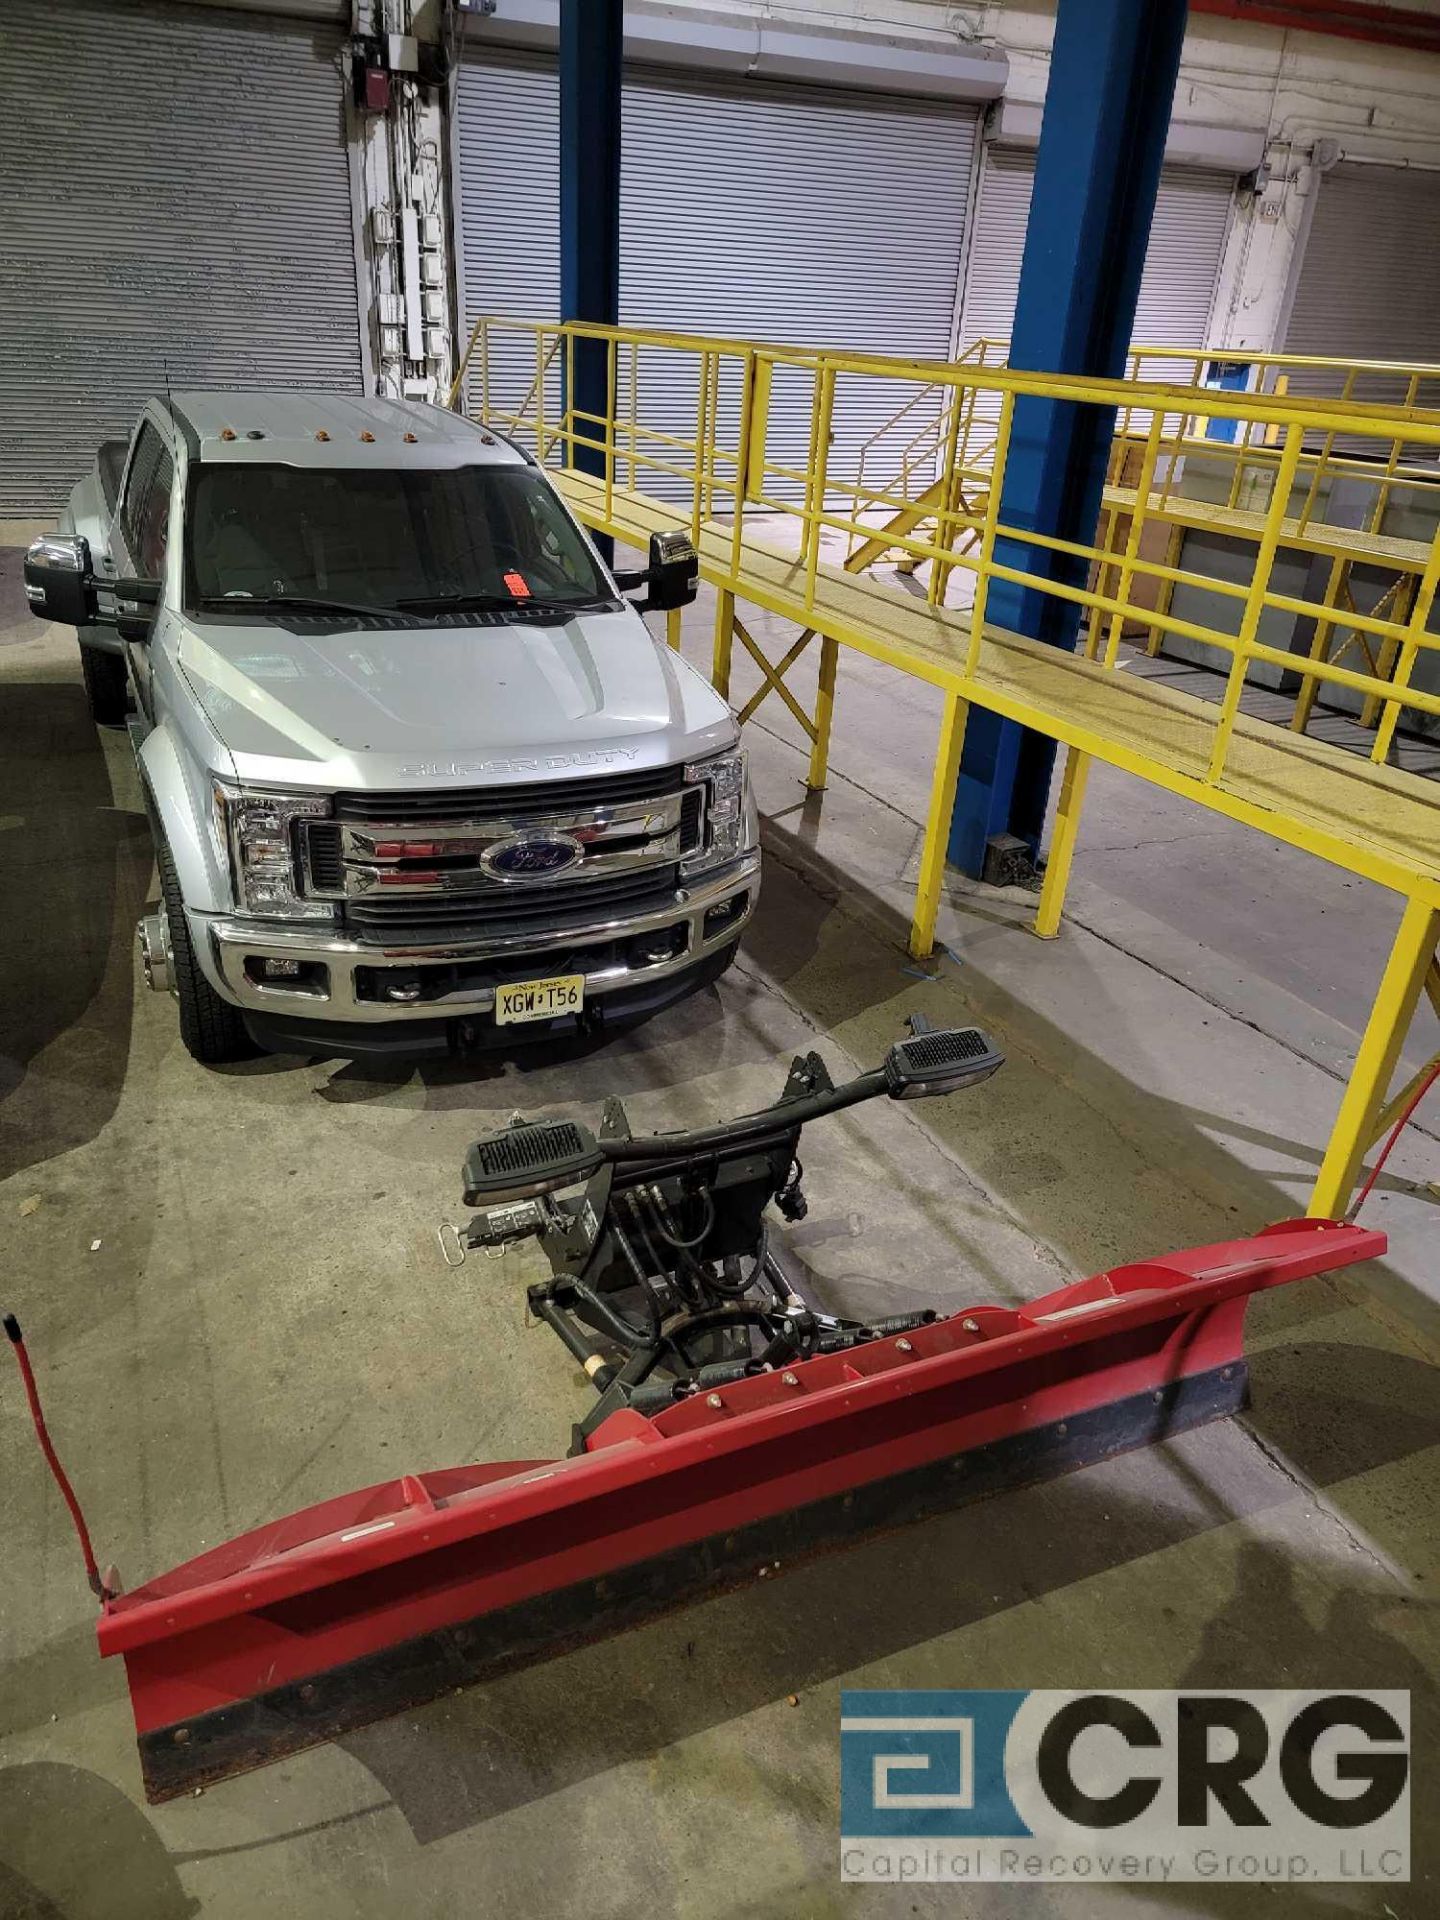 2019 Ford F-450 crew cab dually pick up - Image 2 of 5